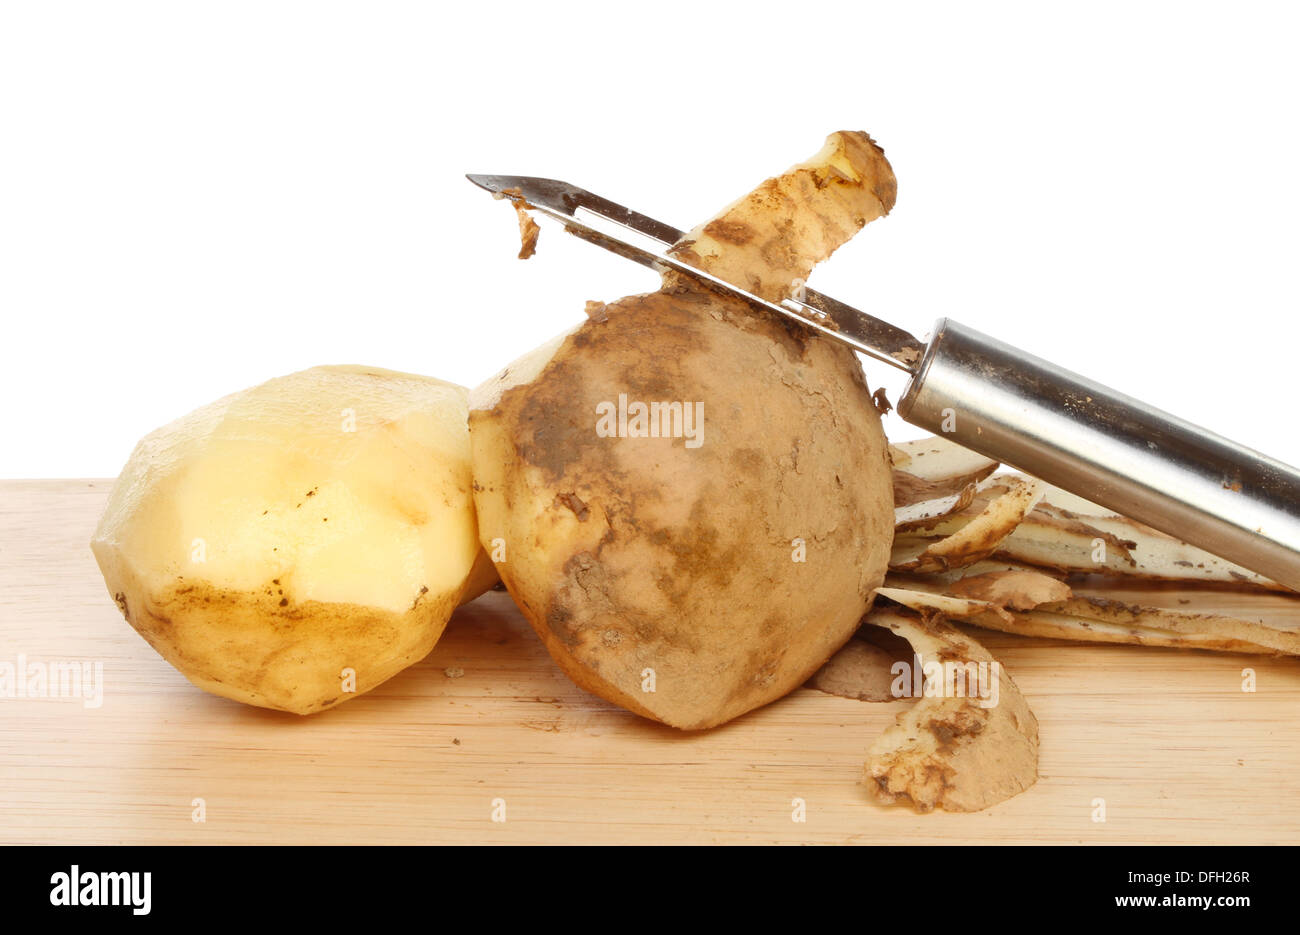 https://c8.alamy.com/comp/DFH26R/closeup-of-peeled-and-part-peeled-potato-with-a-peeler-on-a-wooden-DFH26R.jpg